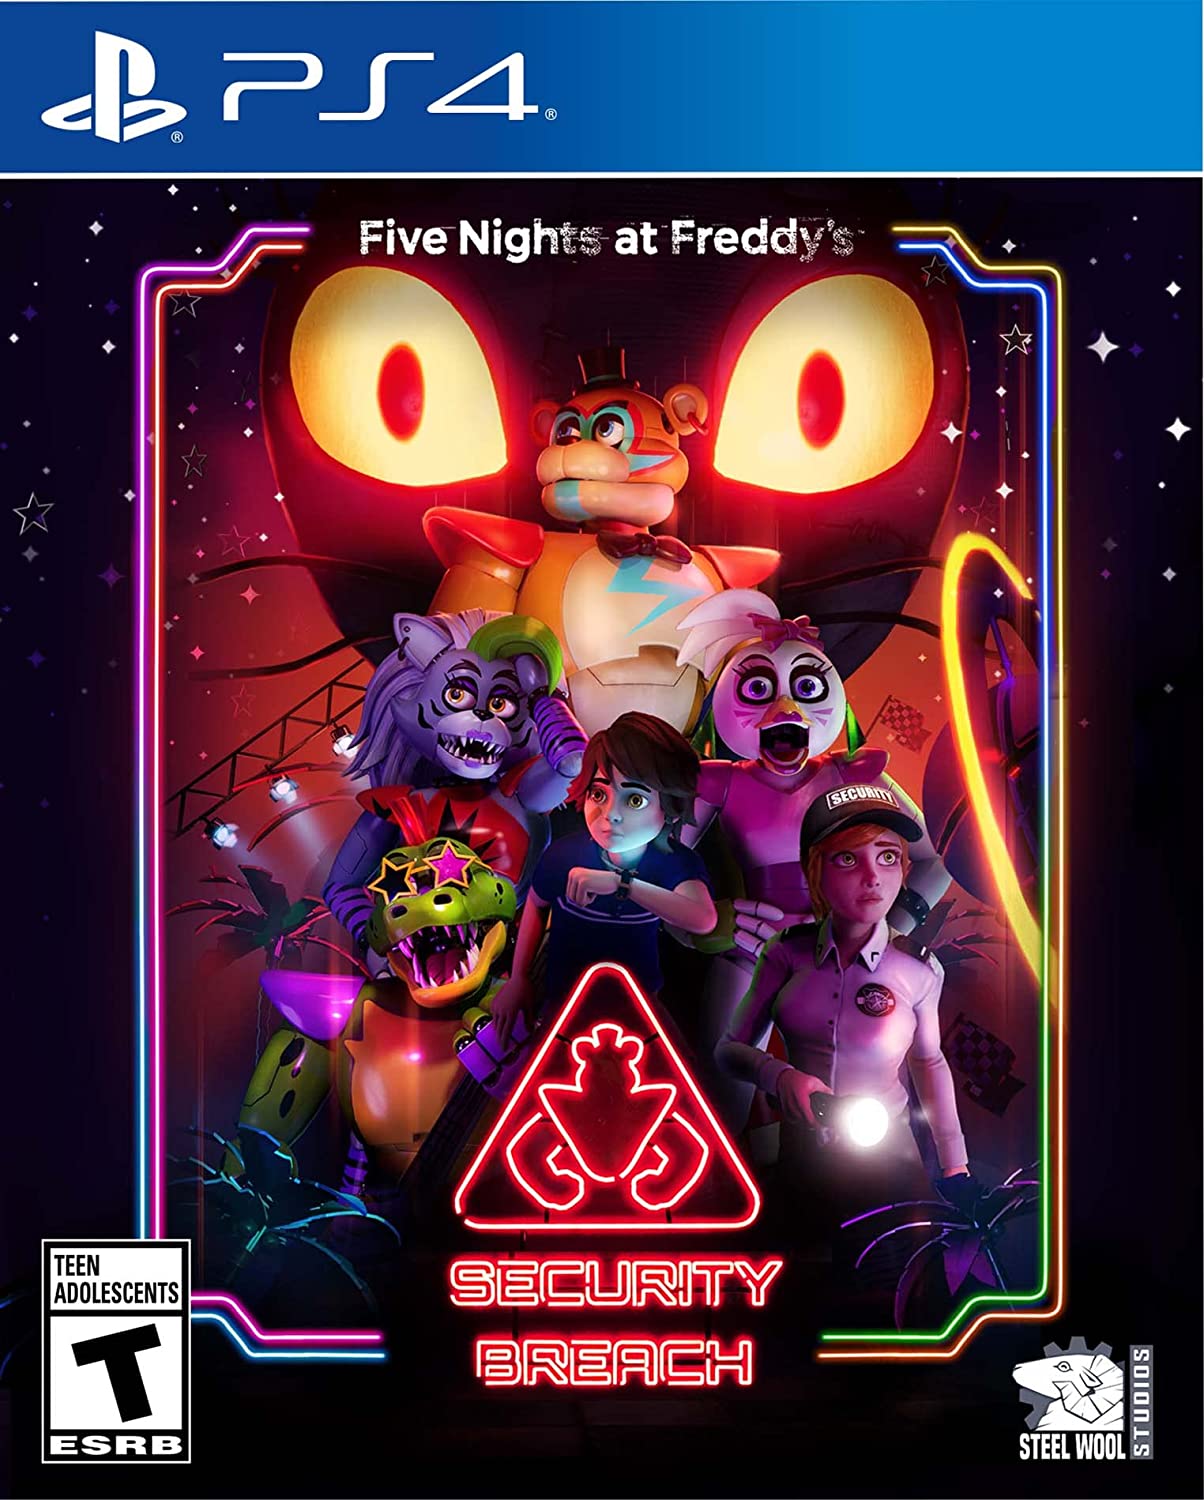 Five Nights At Freddy's S.L. - The Animated Movie 